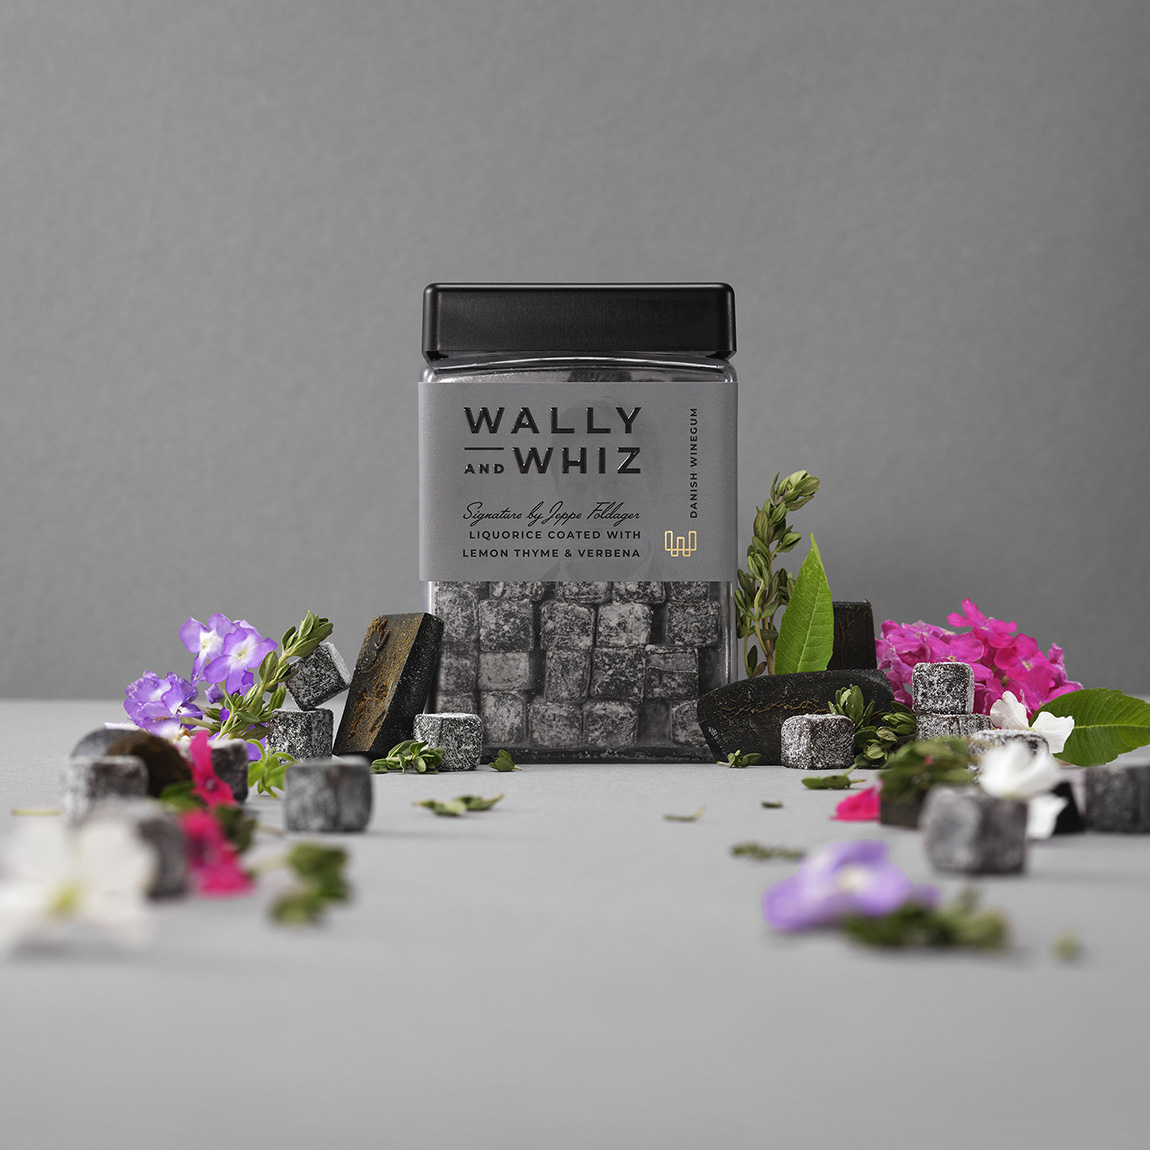 Wally and Whiz: The wine gum that connects people, families and cultures